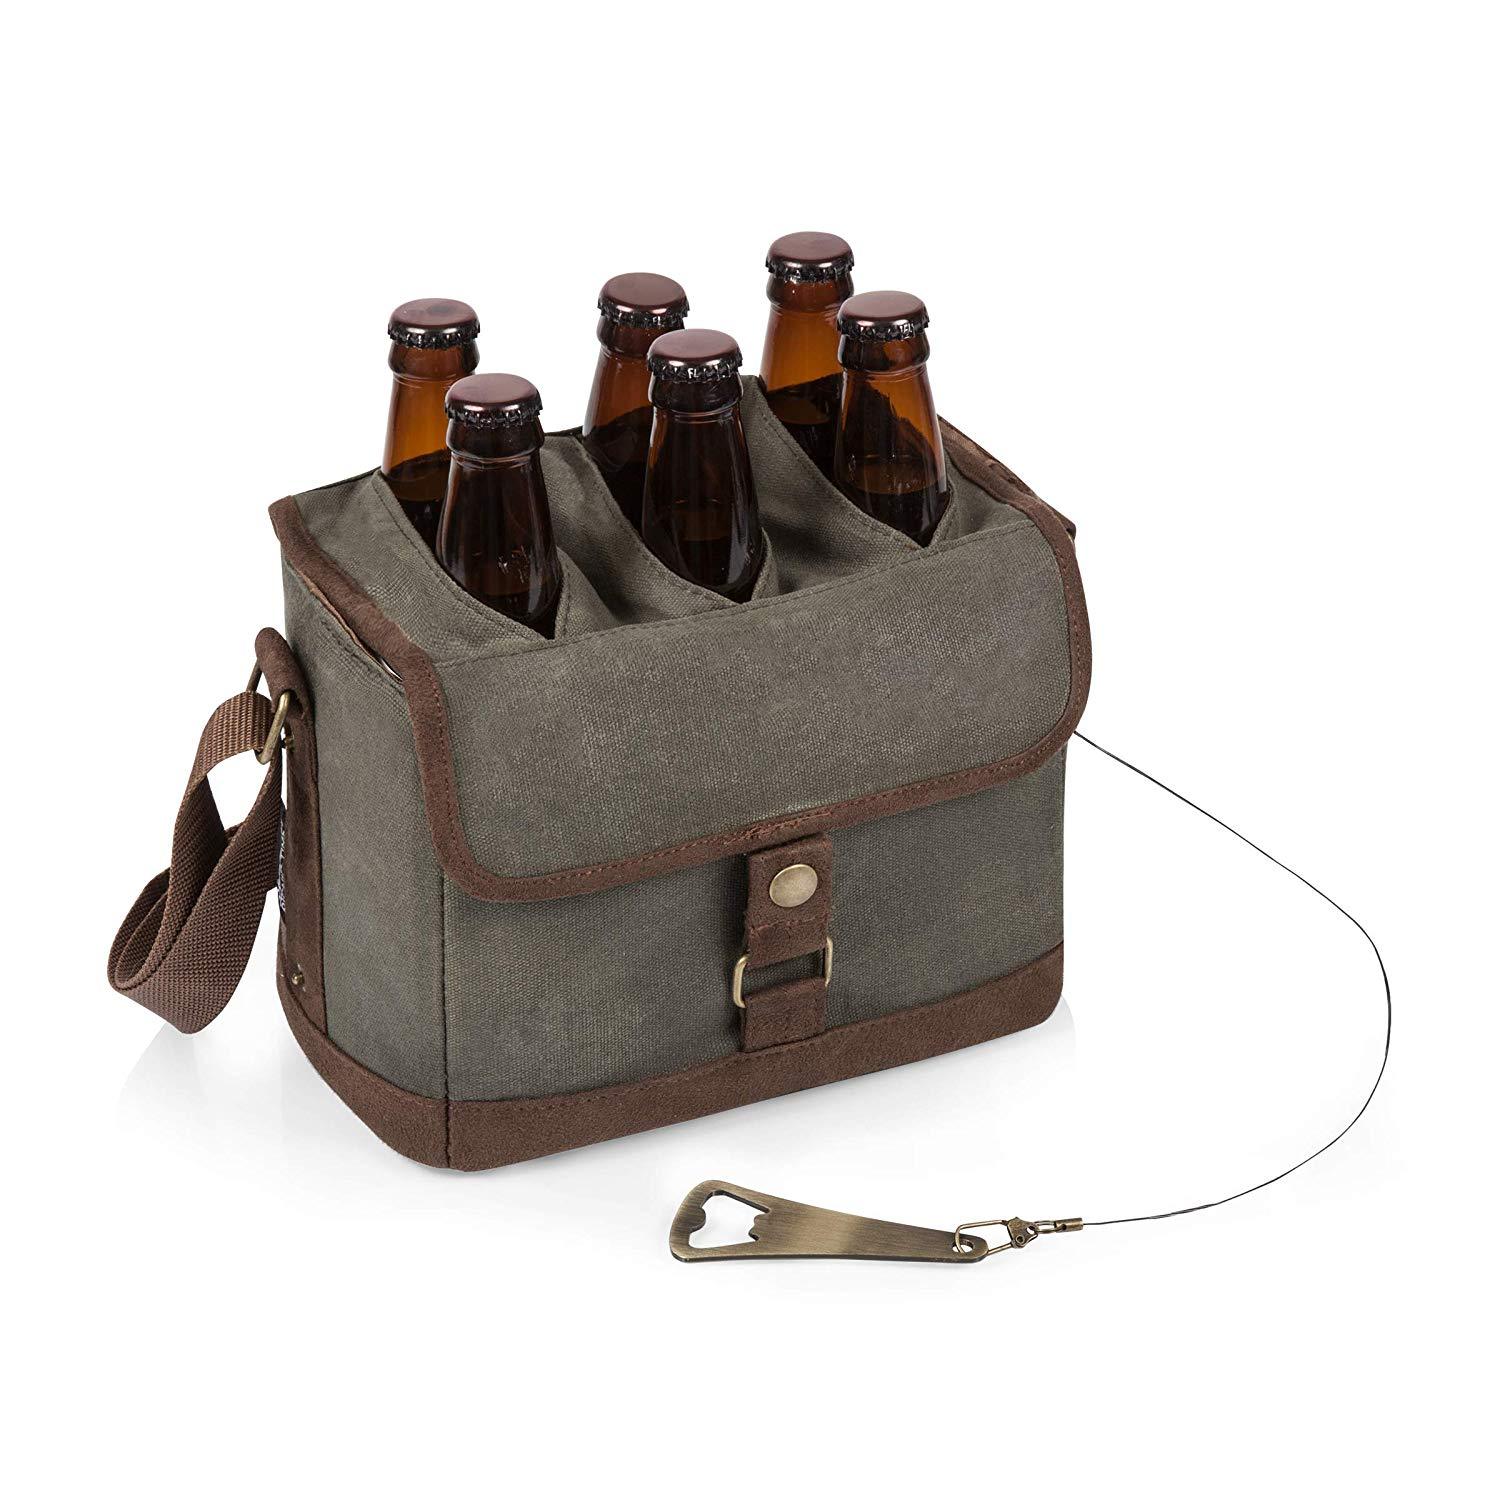 LEGACY - a Picnic Time Brand 6-Bottle Beer Caddy with Integrated Bottle Opener, Khaki Green/Brown